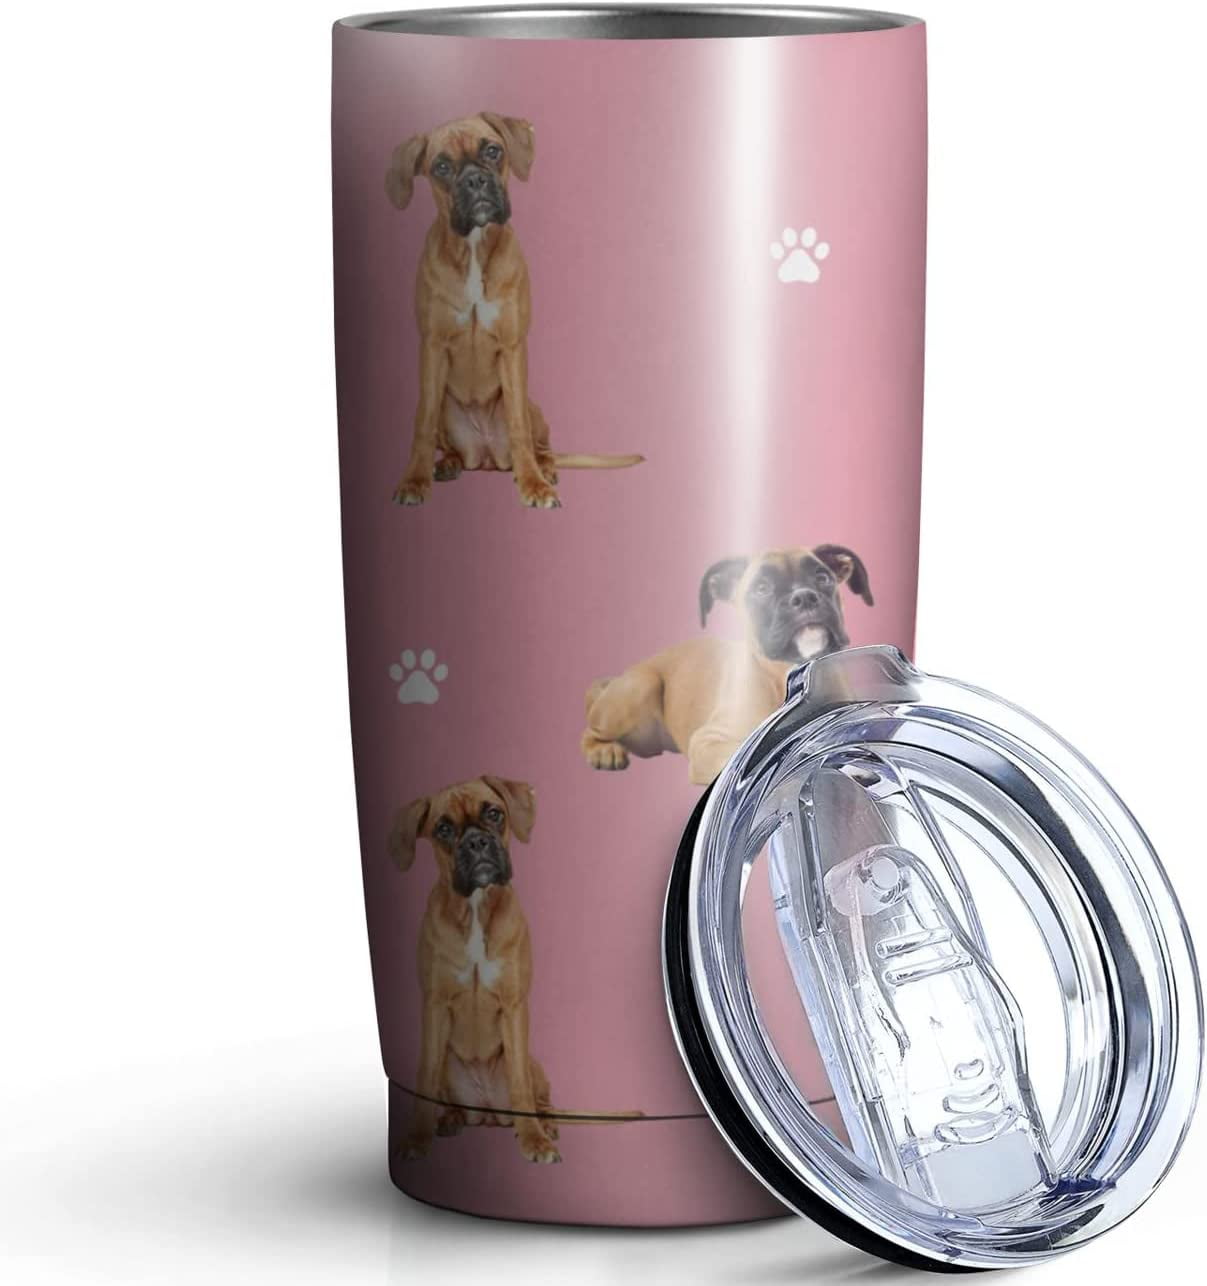 Boxer Design Tumbler Stainless Steel Insulated Travel Coffee Cups with Lid and Straw,Ideal Memorial Gift for Dog Dad/Mom,20oz